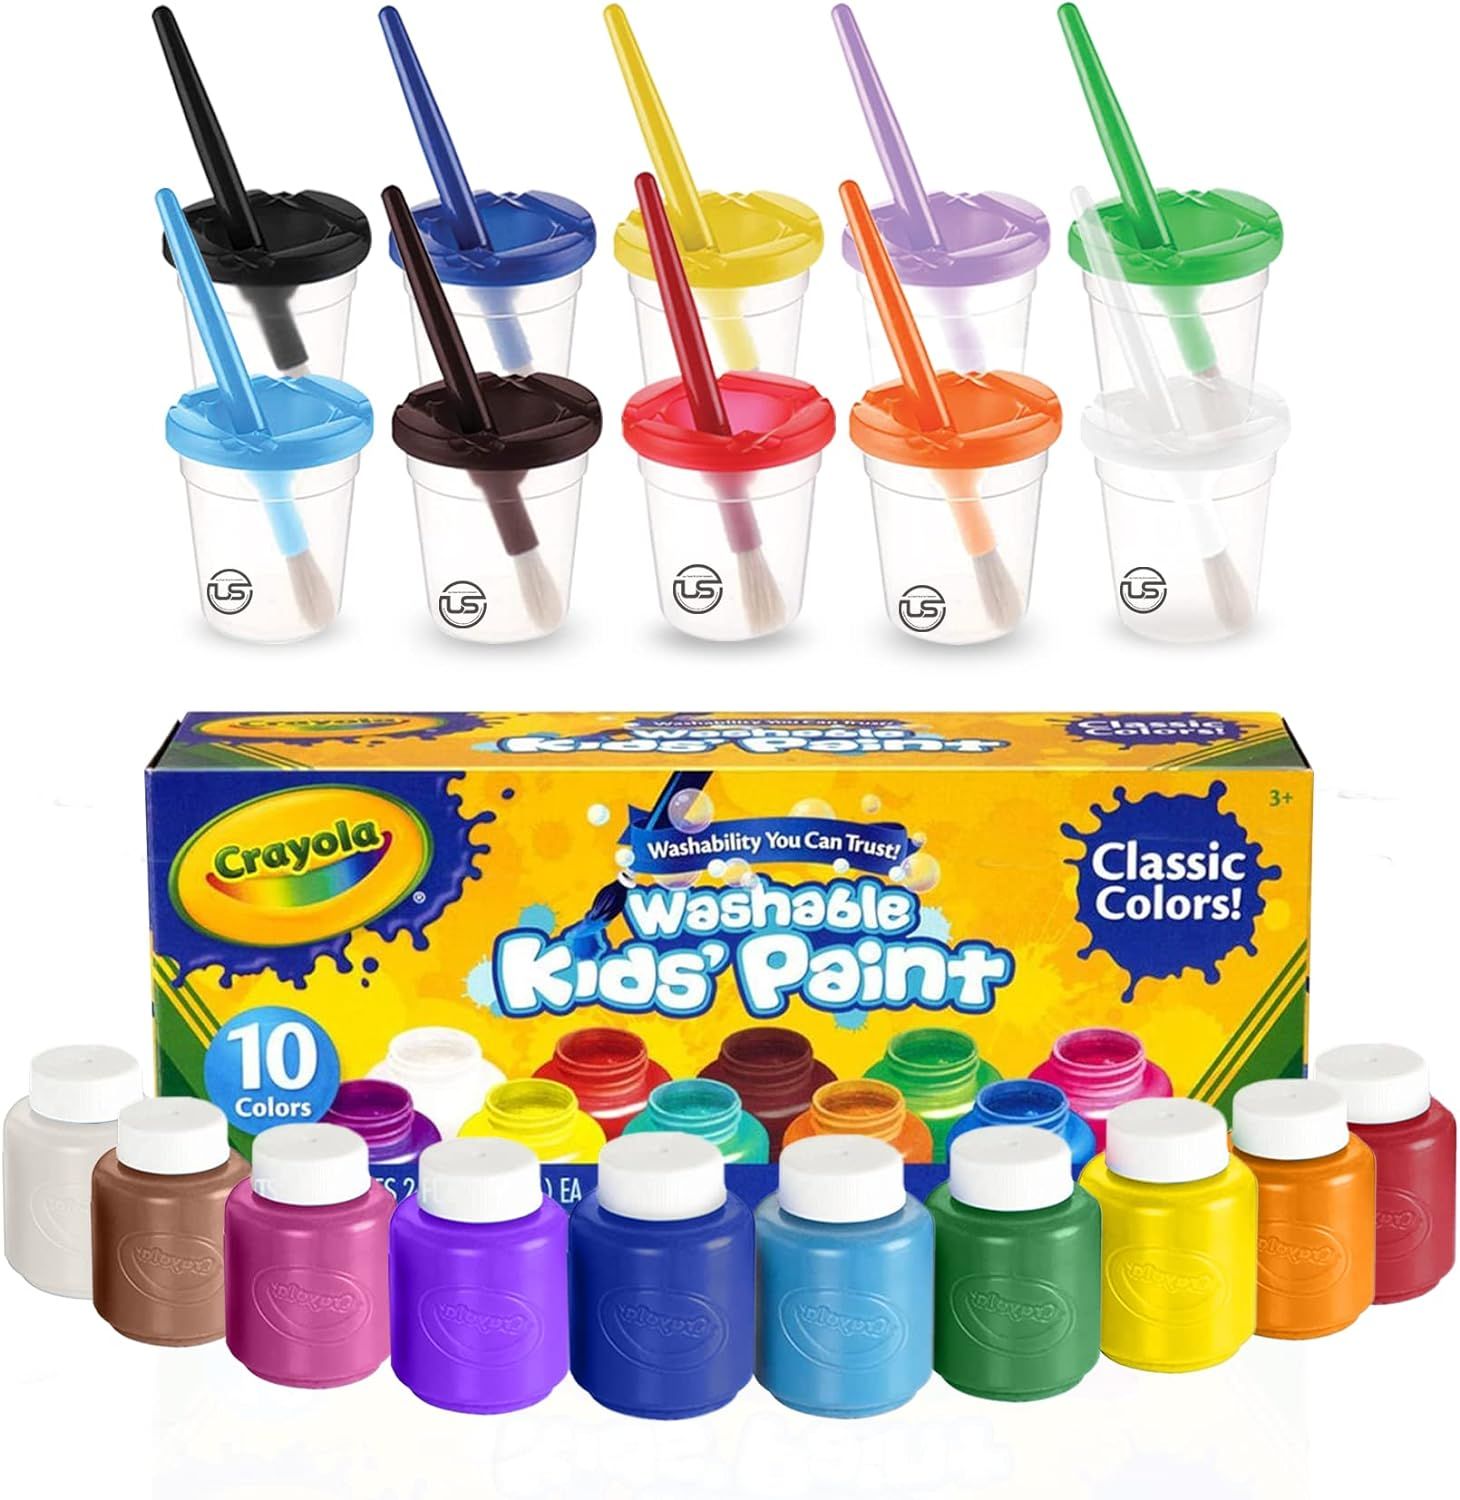 Kids Paint Set - Kids Paint with Toddler Art Supplies Included, Washable Paint for Kids with Todd... | Amazon (US)